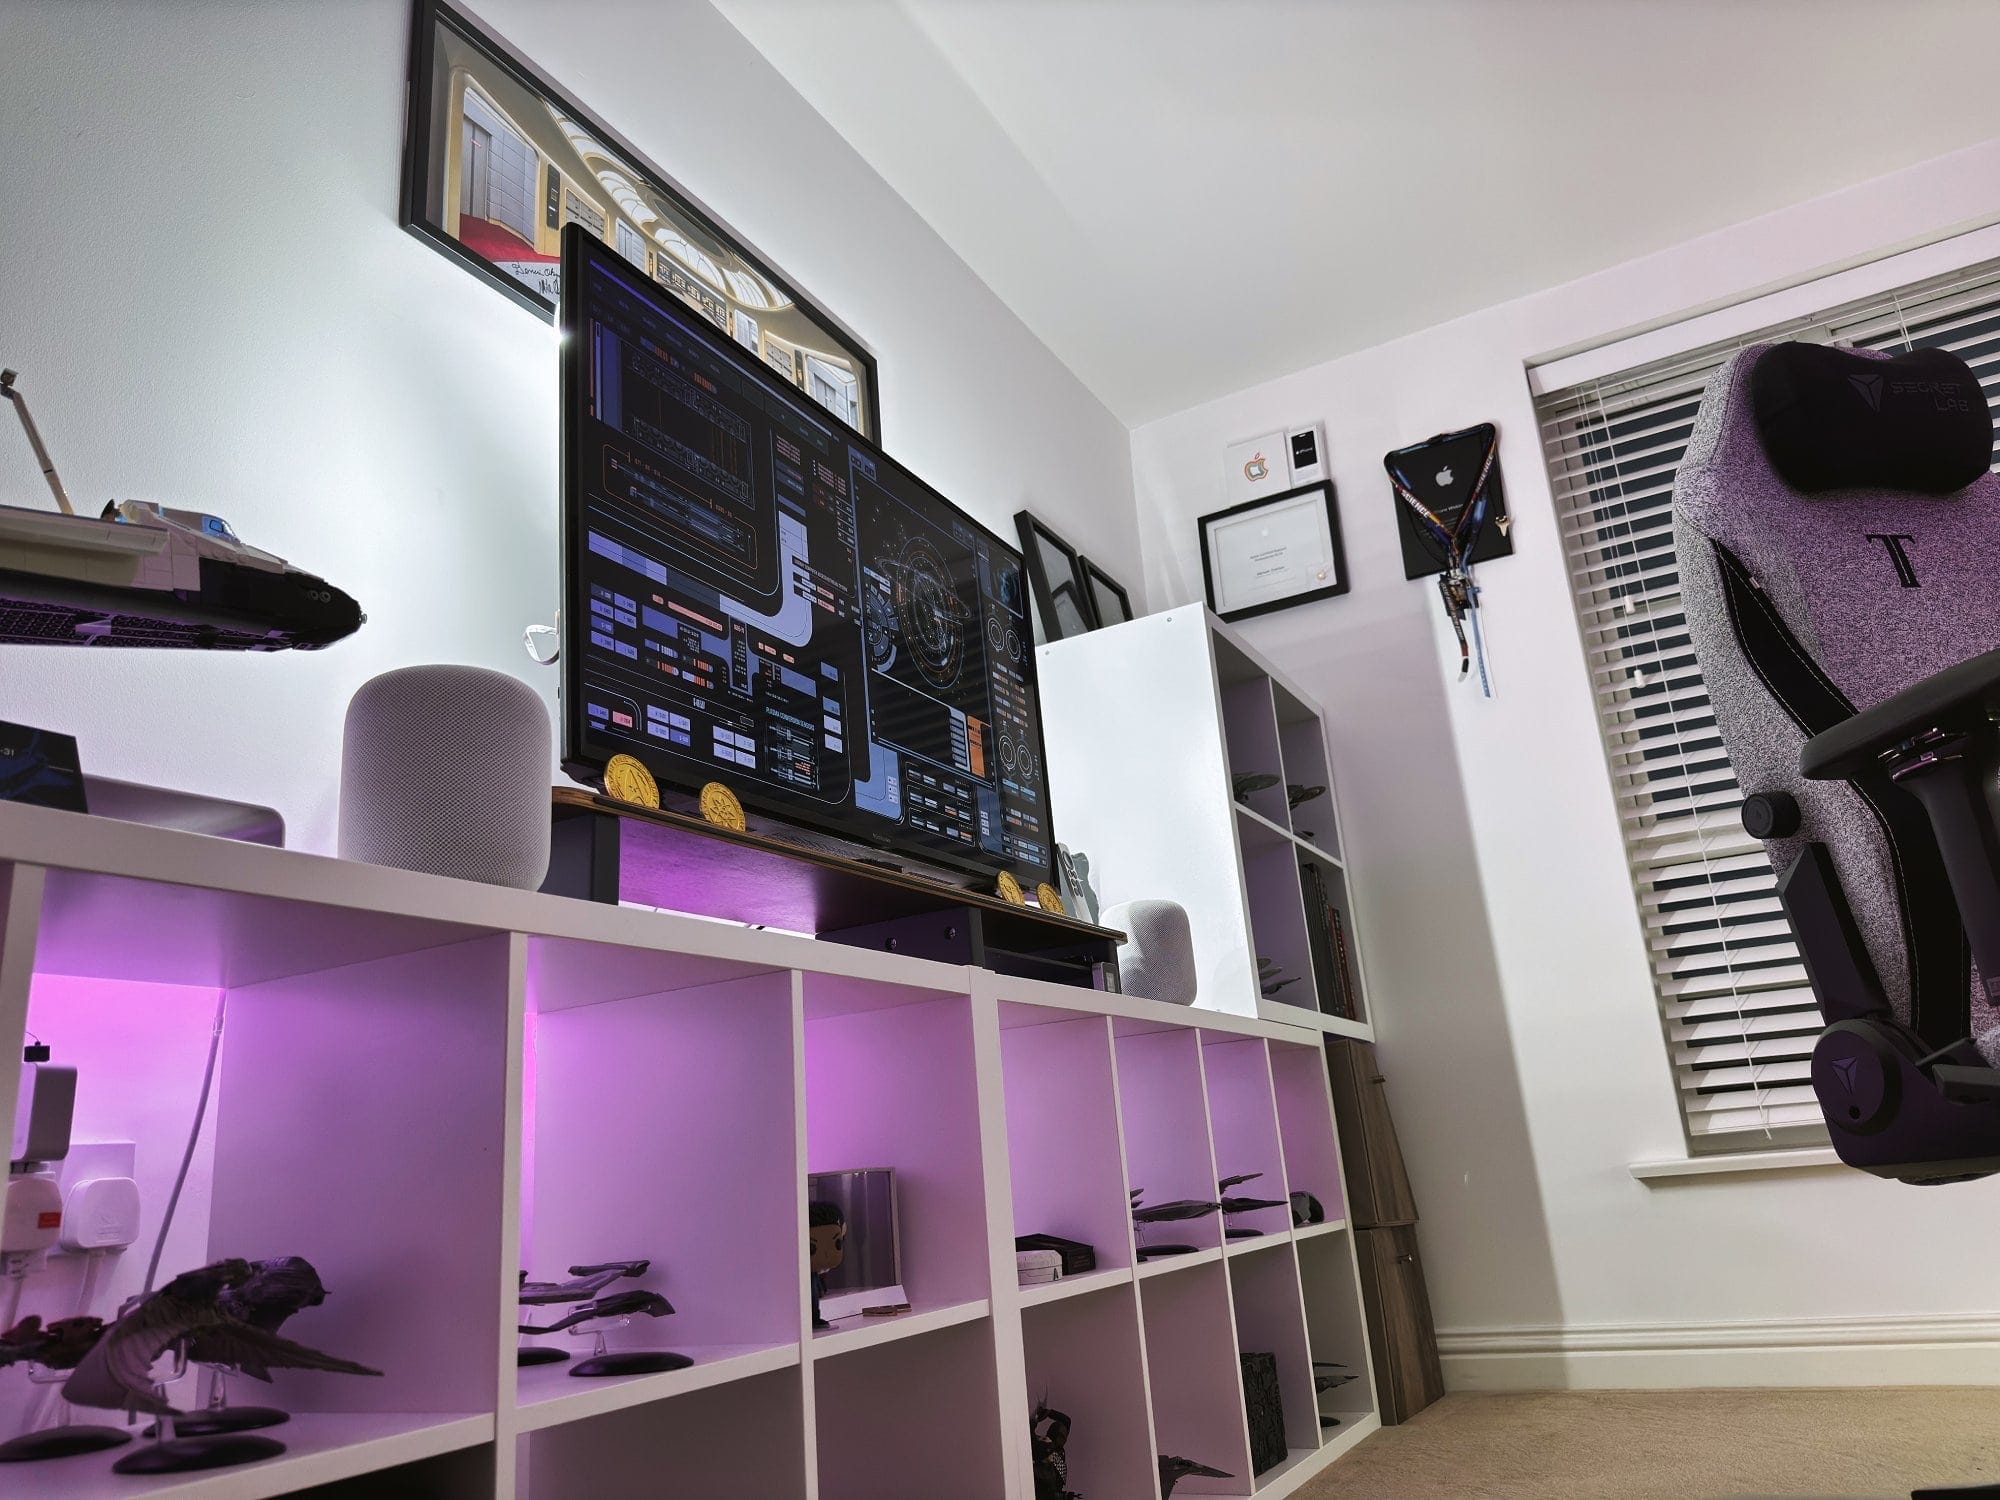 A corner view of a home office with a monitor on a white shelf displaying starship schematics, a gaming chair to the side, Star Trek models on the shelves, and certificates on the wall, all under a soft purple glow